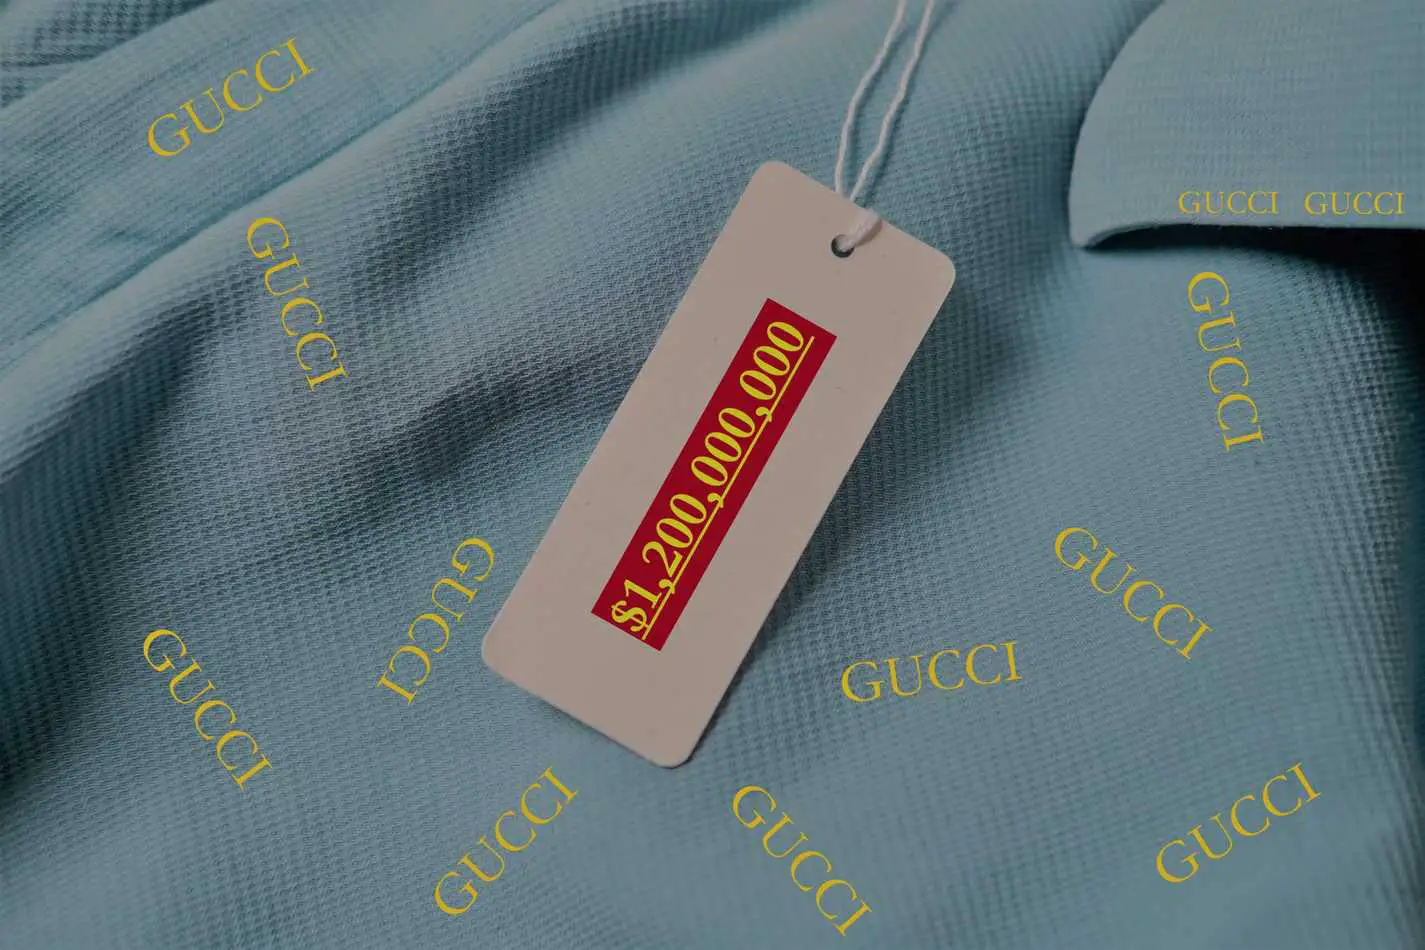 Labeled branded clothes